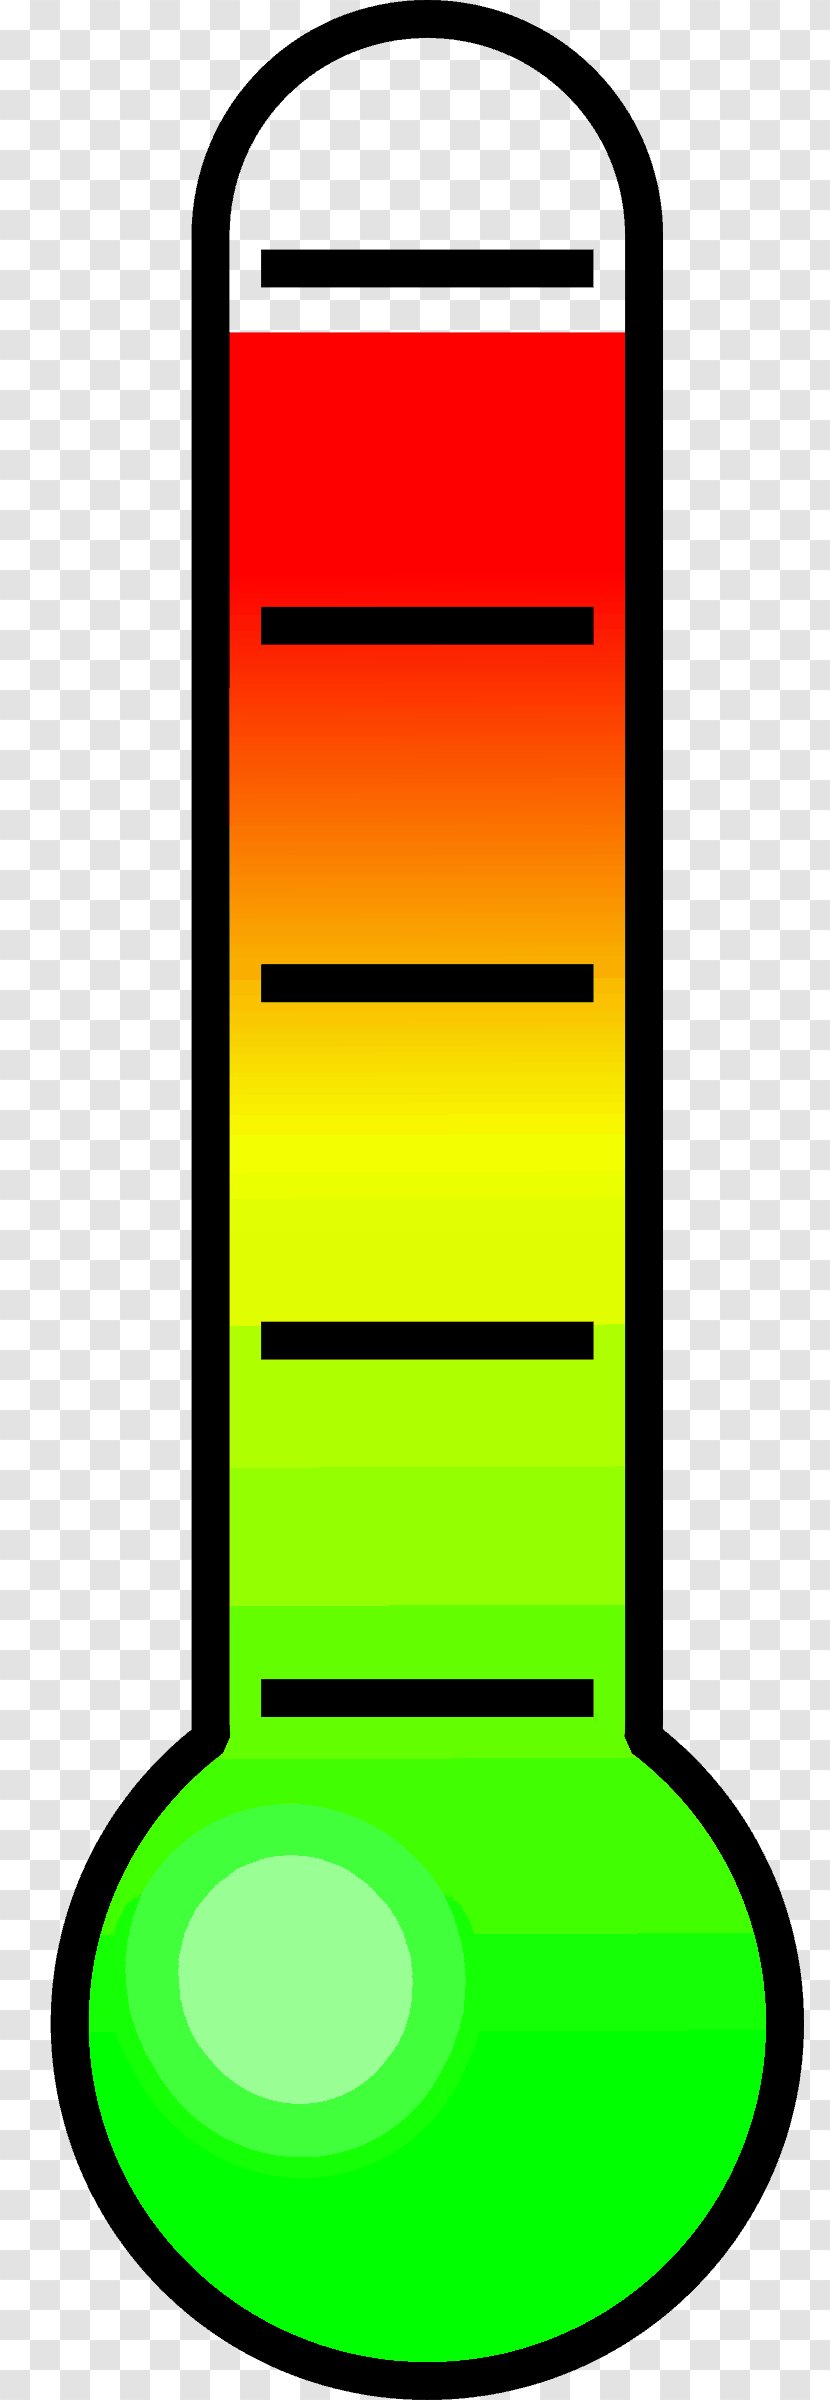 Thermometer Clip Art - Technology - Yellow Transparent PNG